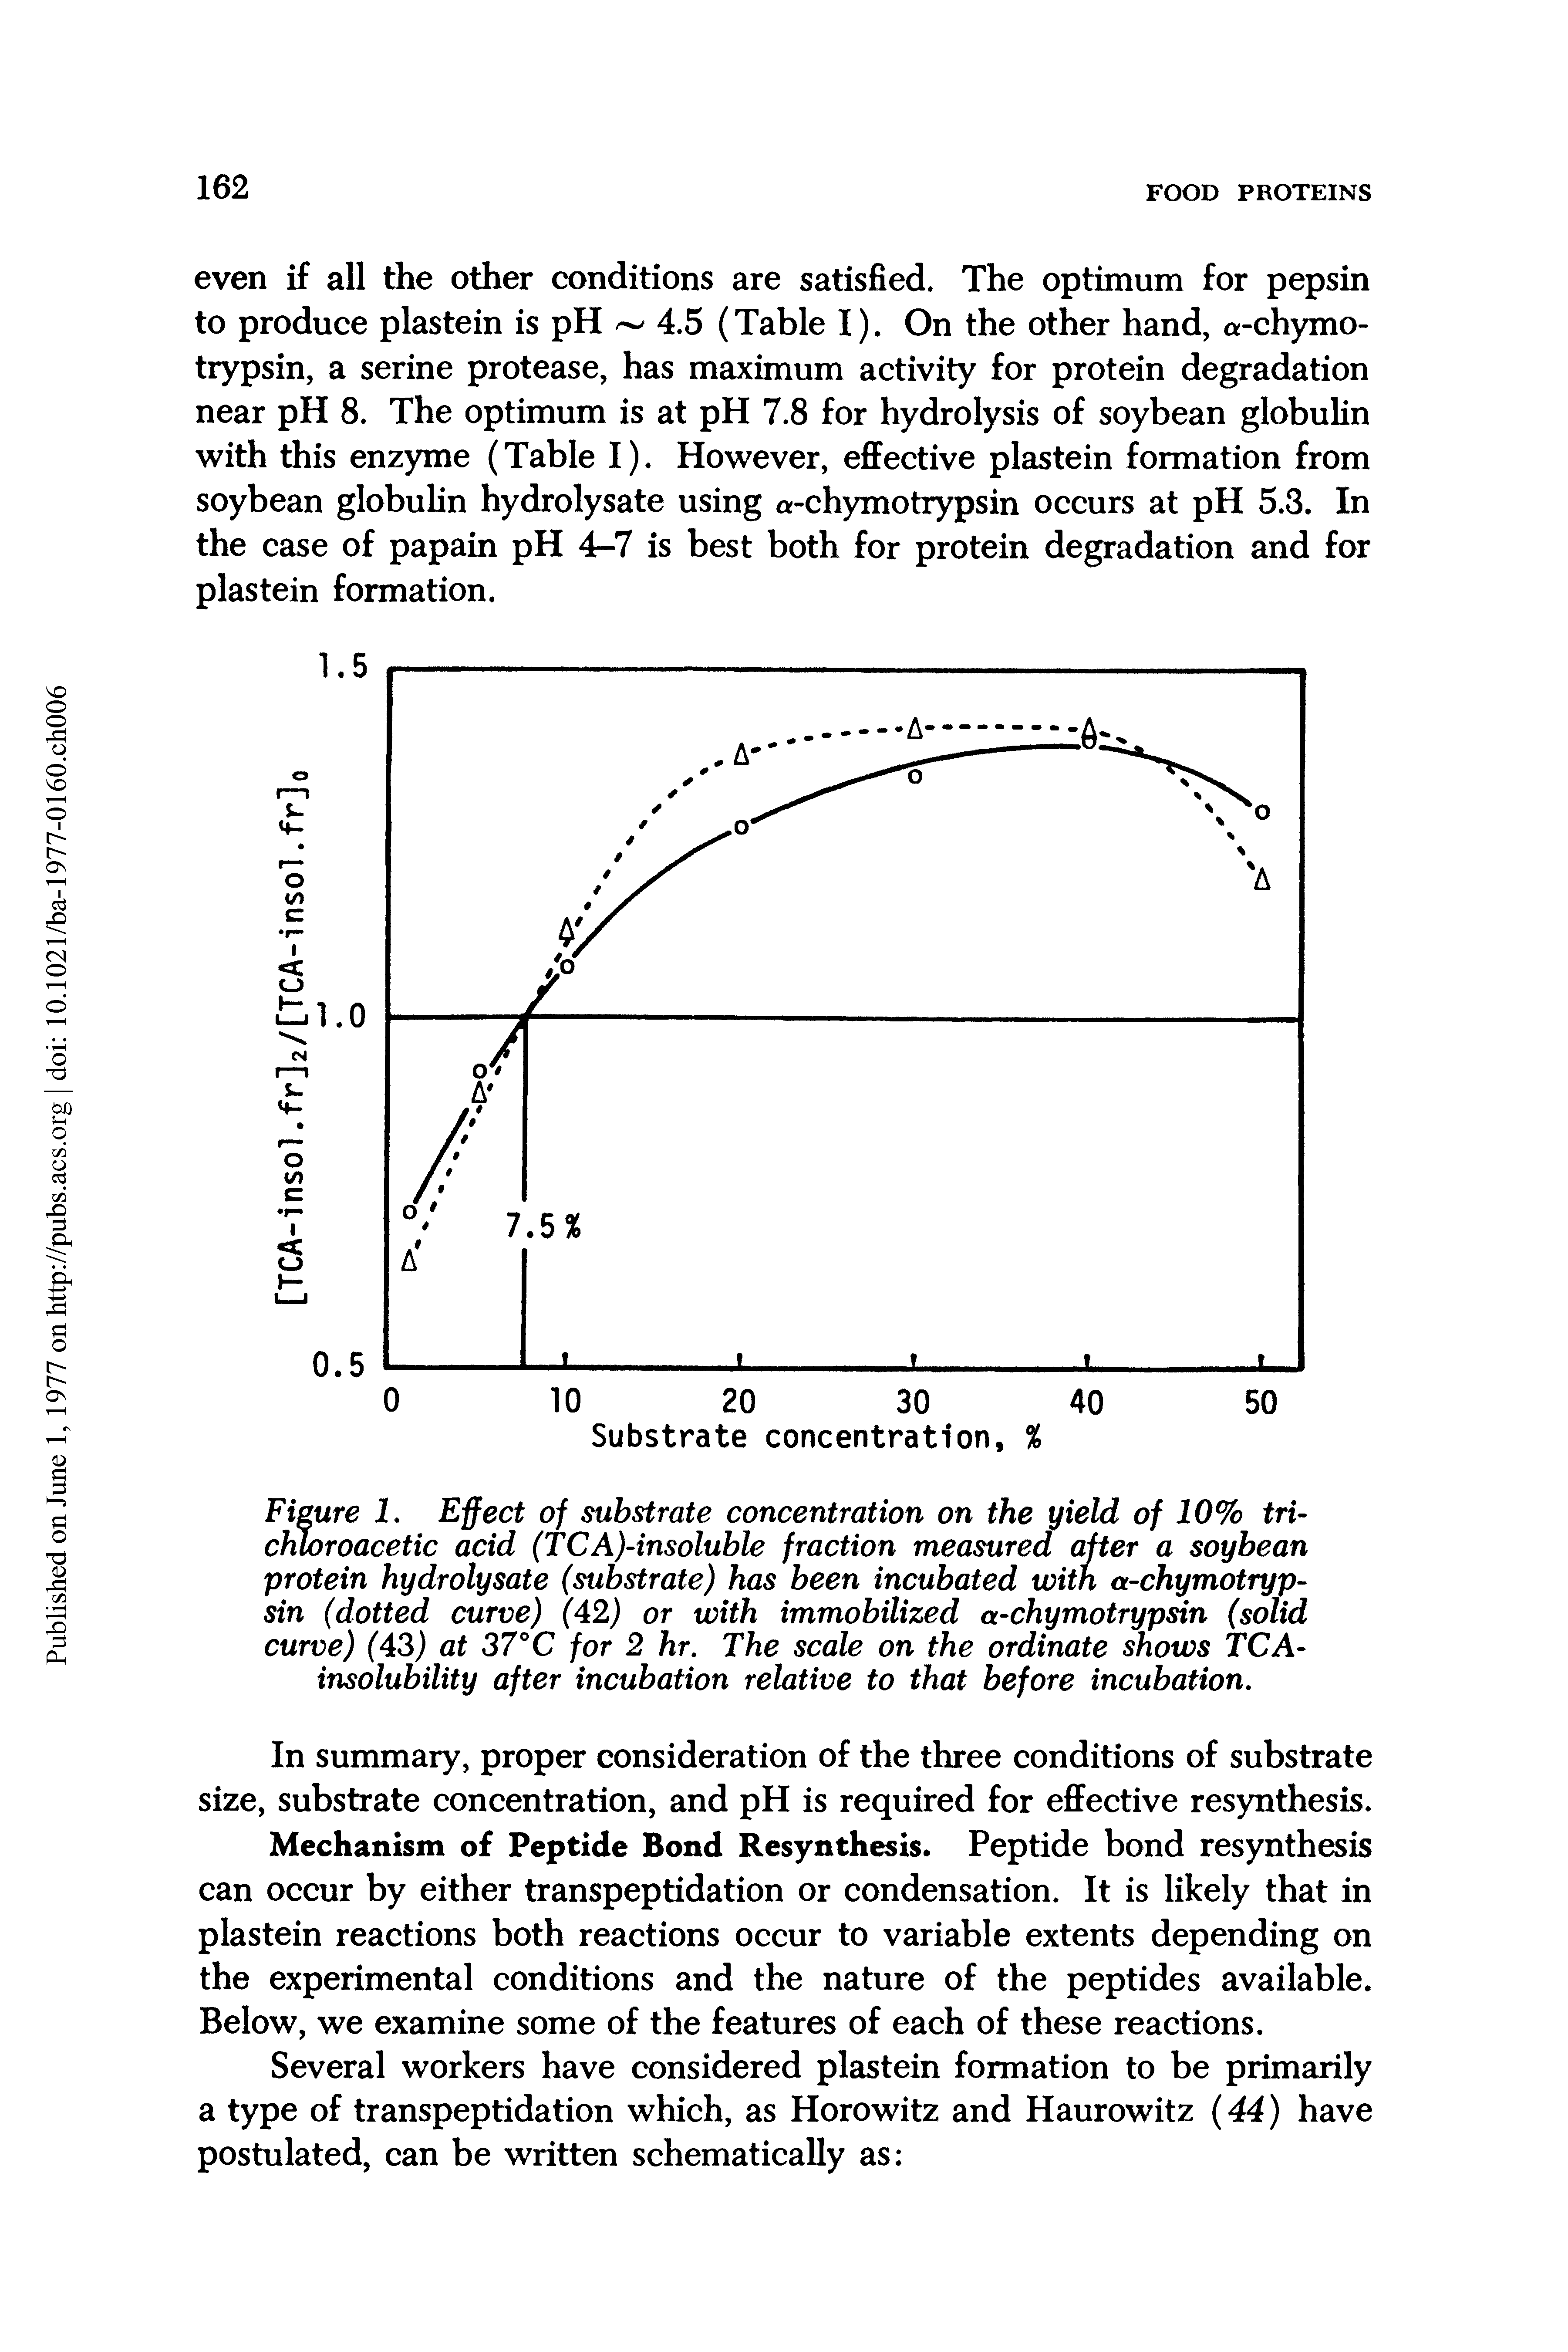 Figure 1. Effect of substrate concentration on the yield of 10% trichloroacetic acid (TCA)-insoluble fraction measured after a soybean protein hydrolysate (substrate) has been incubated with a-chymotrypsin (dotted curve) (42) or with immobilized a-chymotrypsin (solid curve) (43) at 37°C for 2 hr. The scale on the ordinate shows TCA-insolubility after incubation relative to that before incubation.